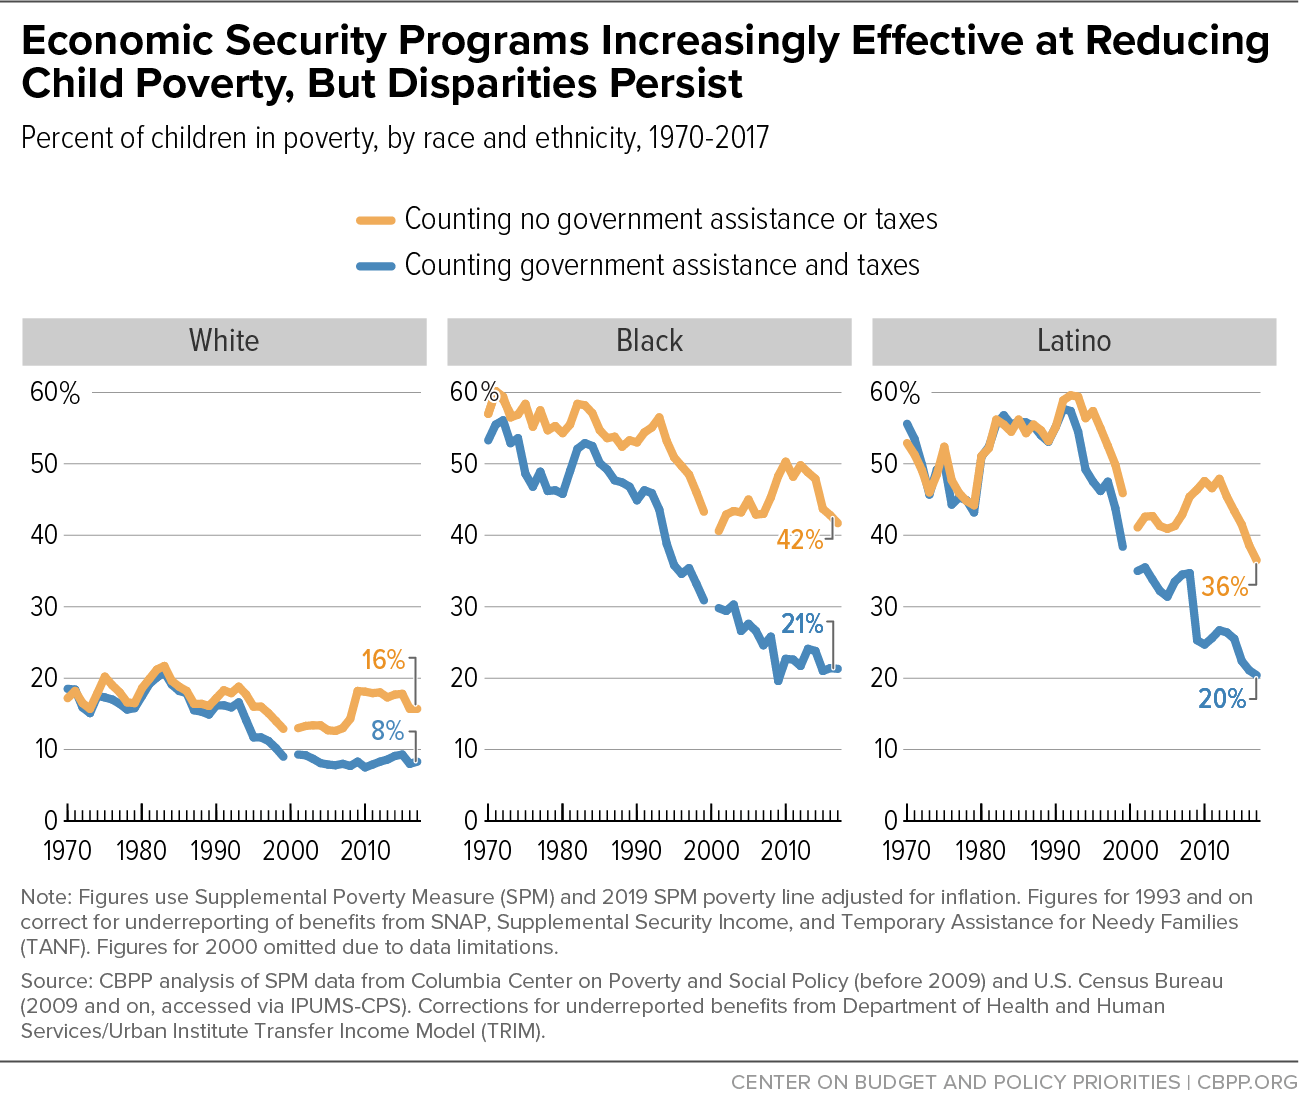 Economic Security Programs Increasingly Effective at Reducing Child Poverty, But Disparities Persist